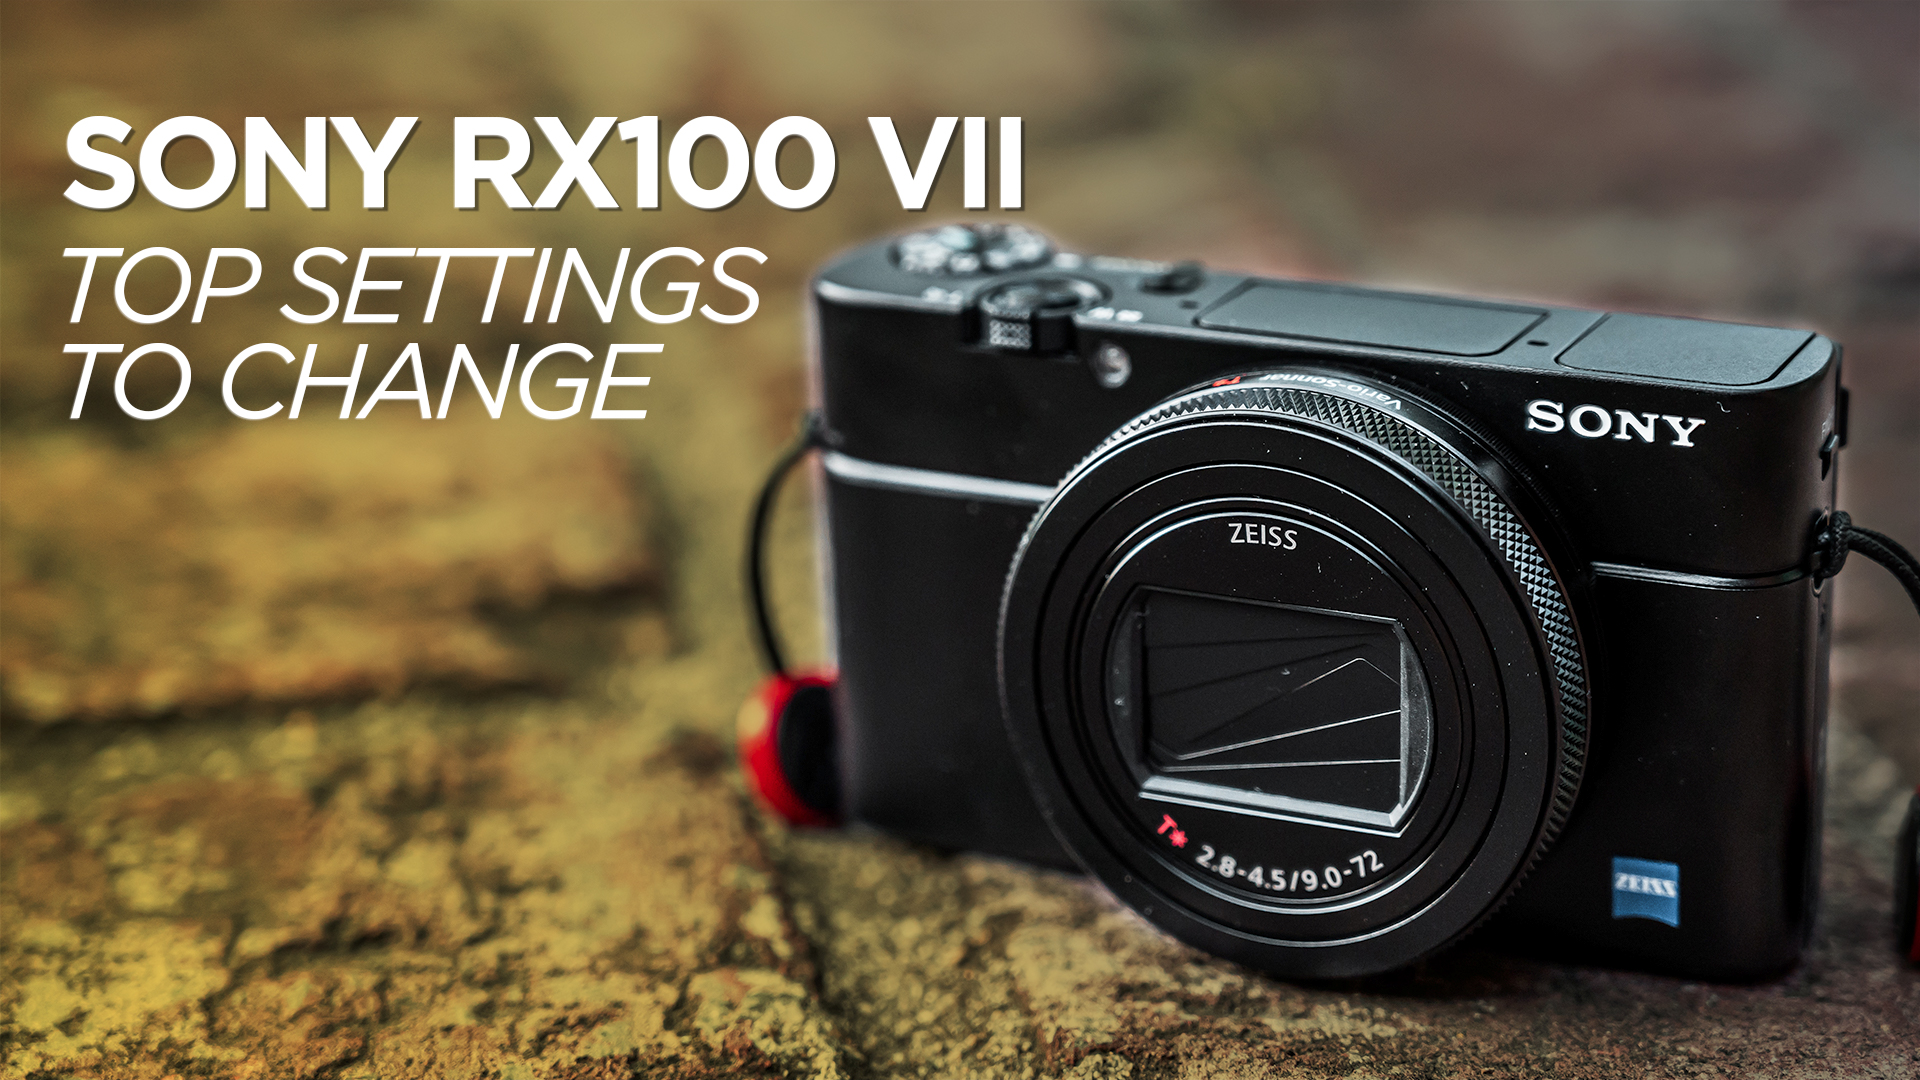 Sony RX100 VII Settings to Change